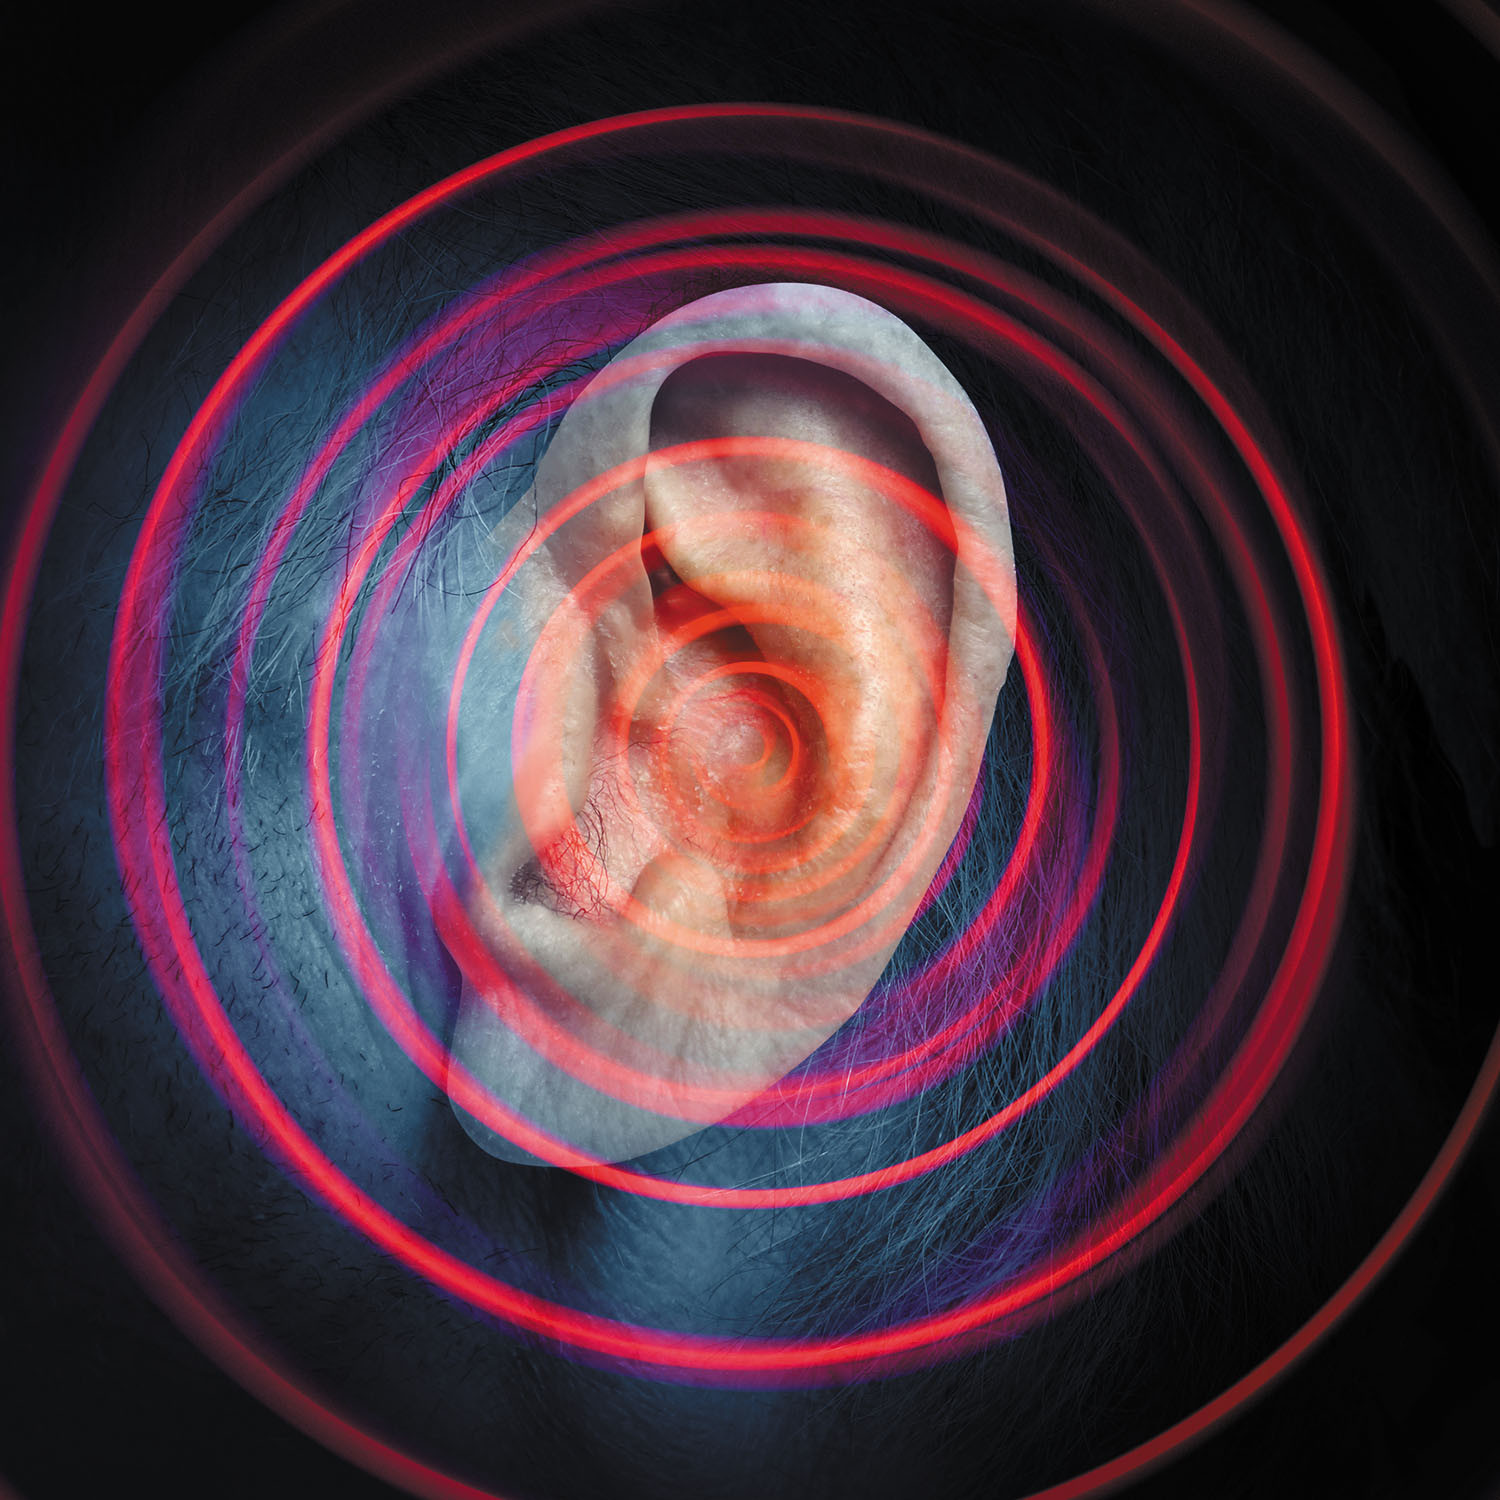 photo illustration showing a close-up of a human ear with concentric red circles representing sound waves